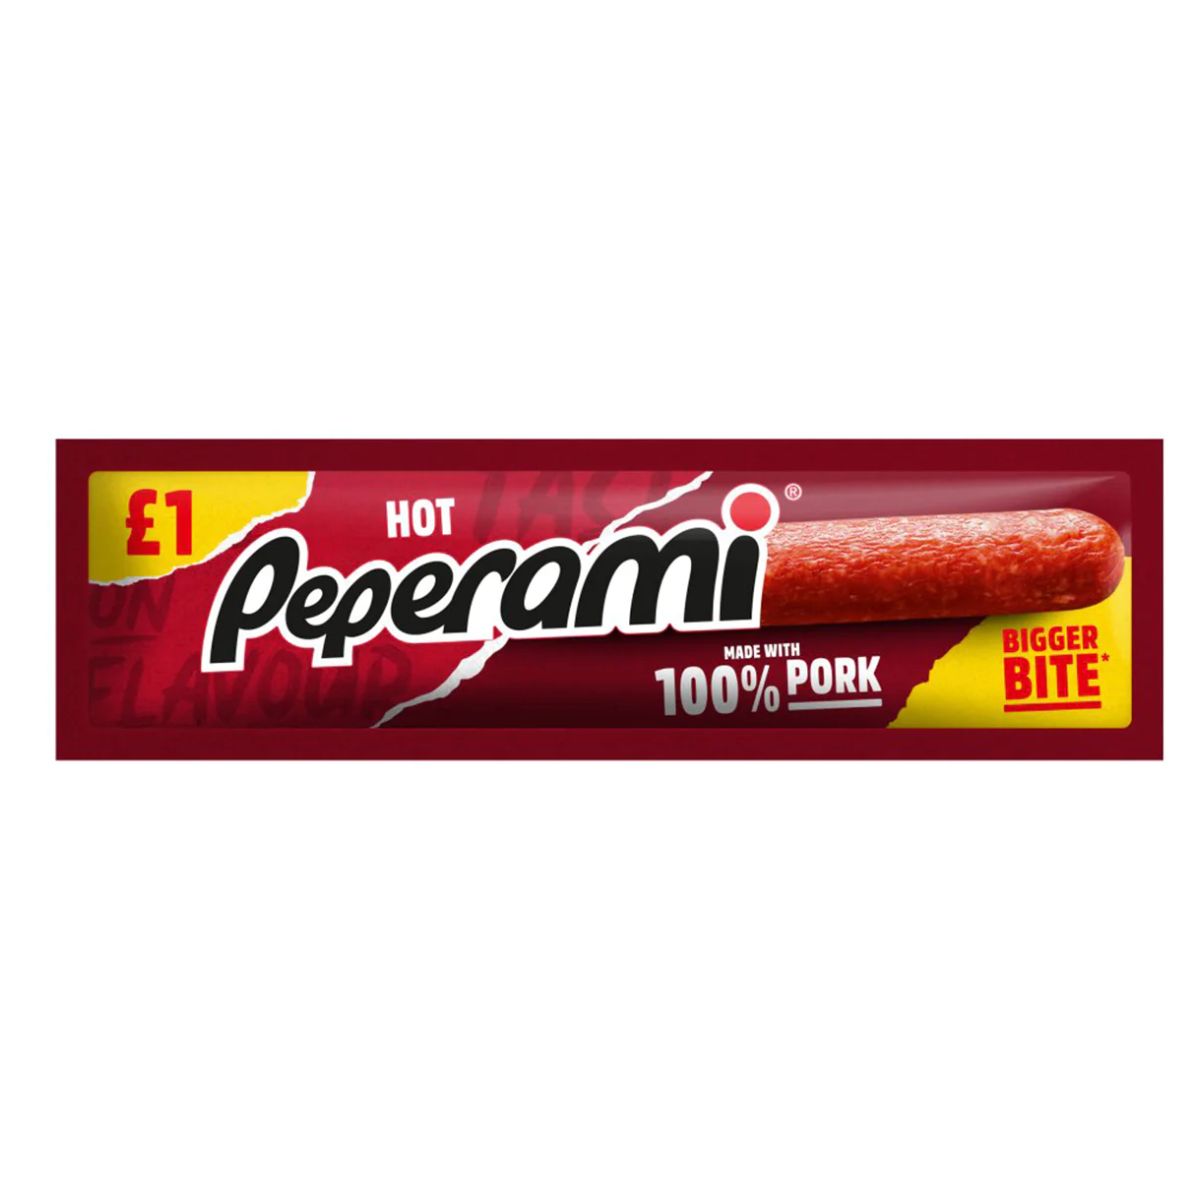 Peperami - Hot - 28g packaging displaying the product and the price of £1.